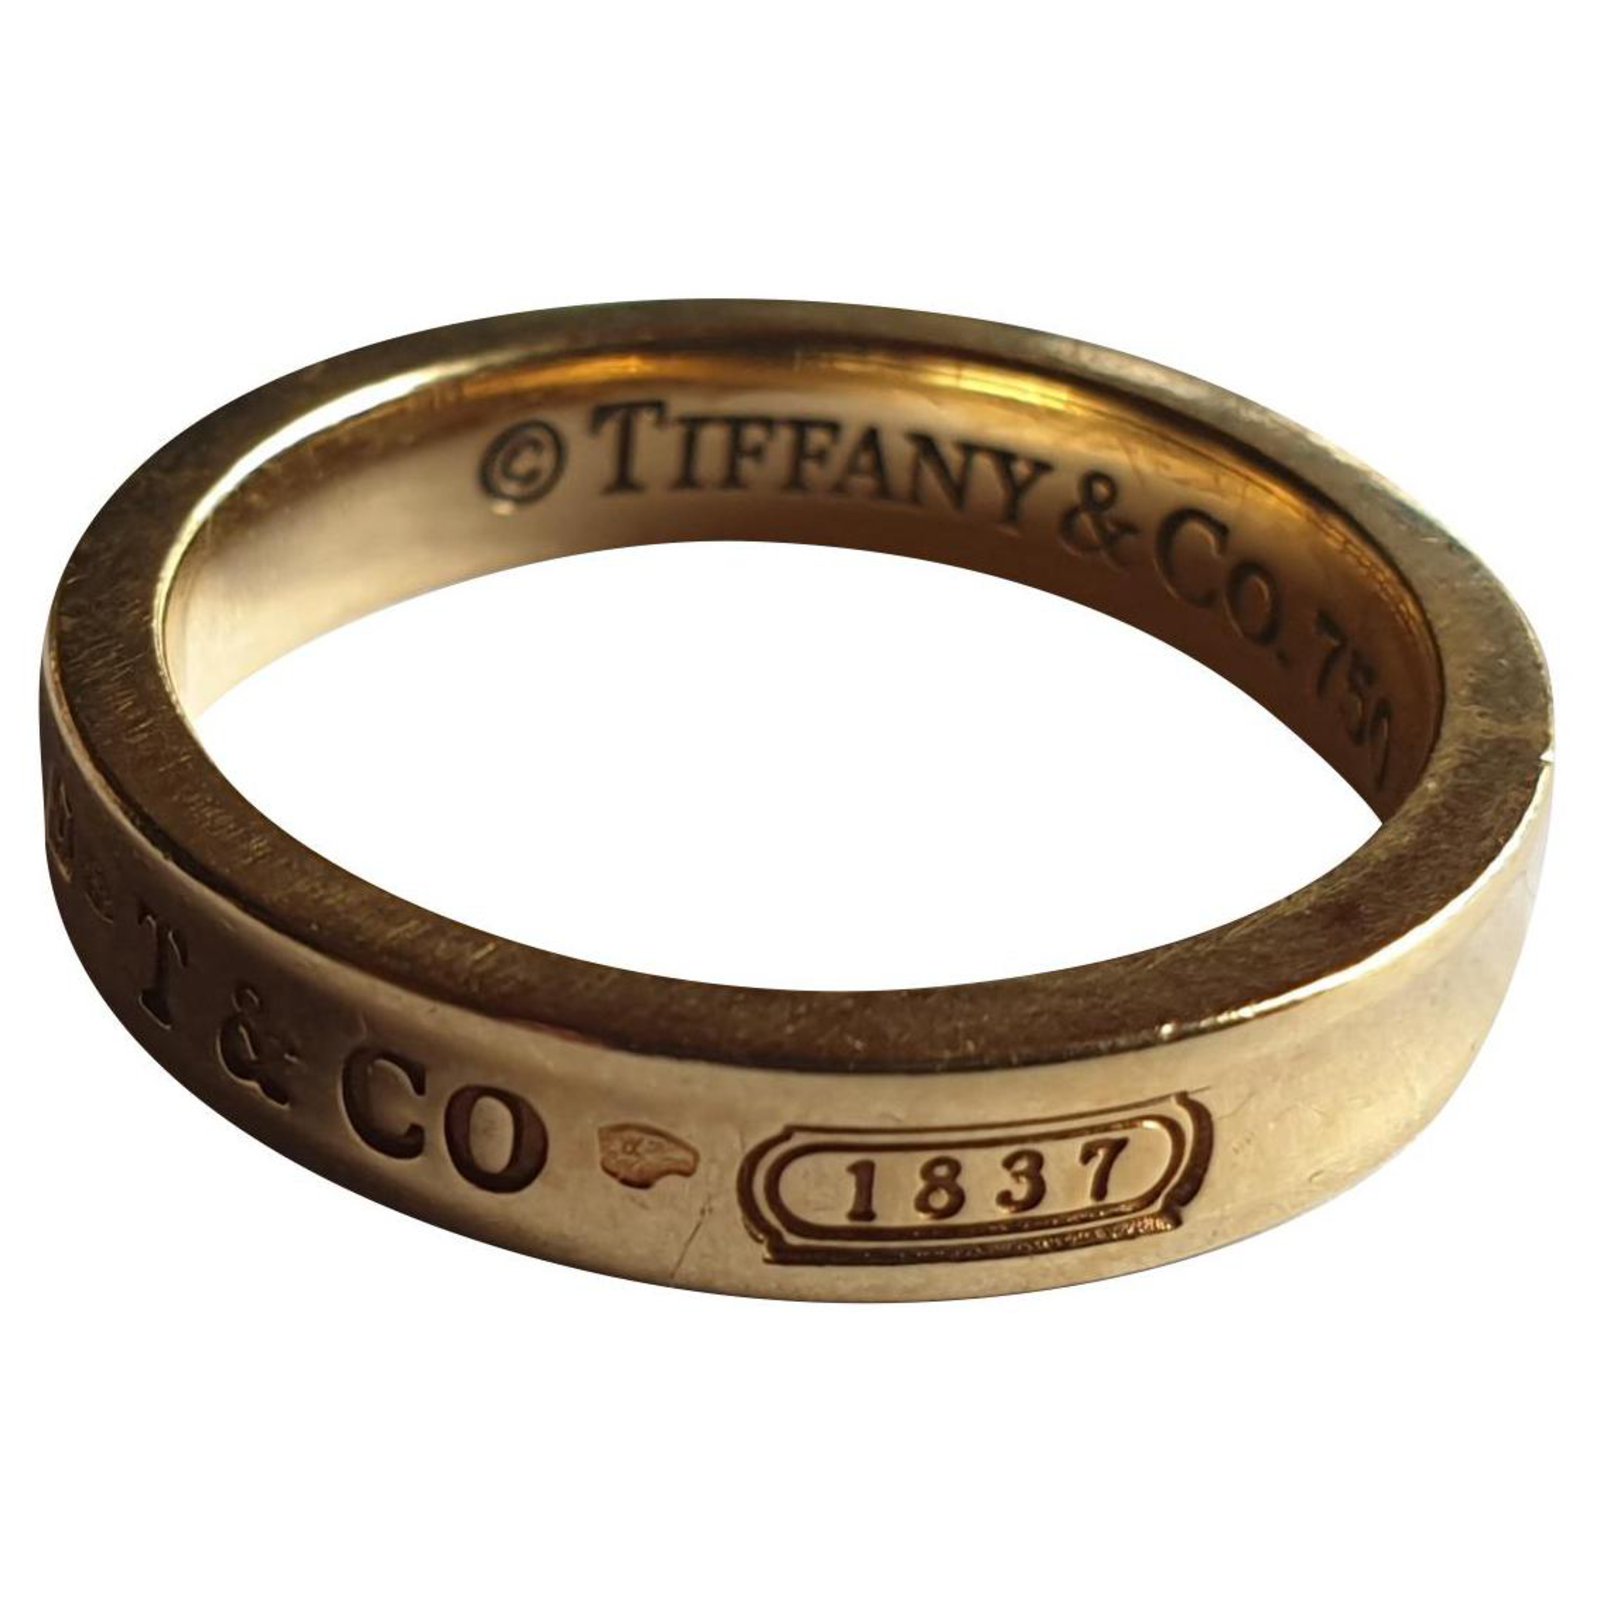 tiffany and co ring 1837